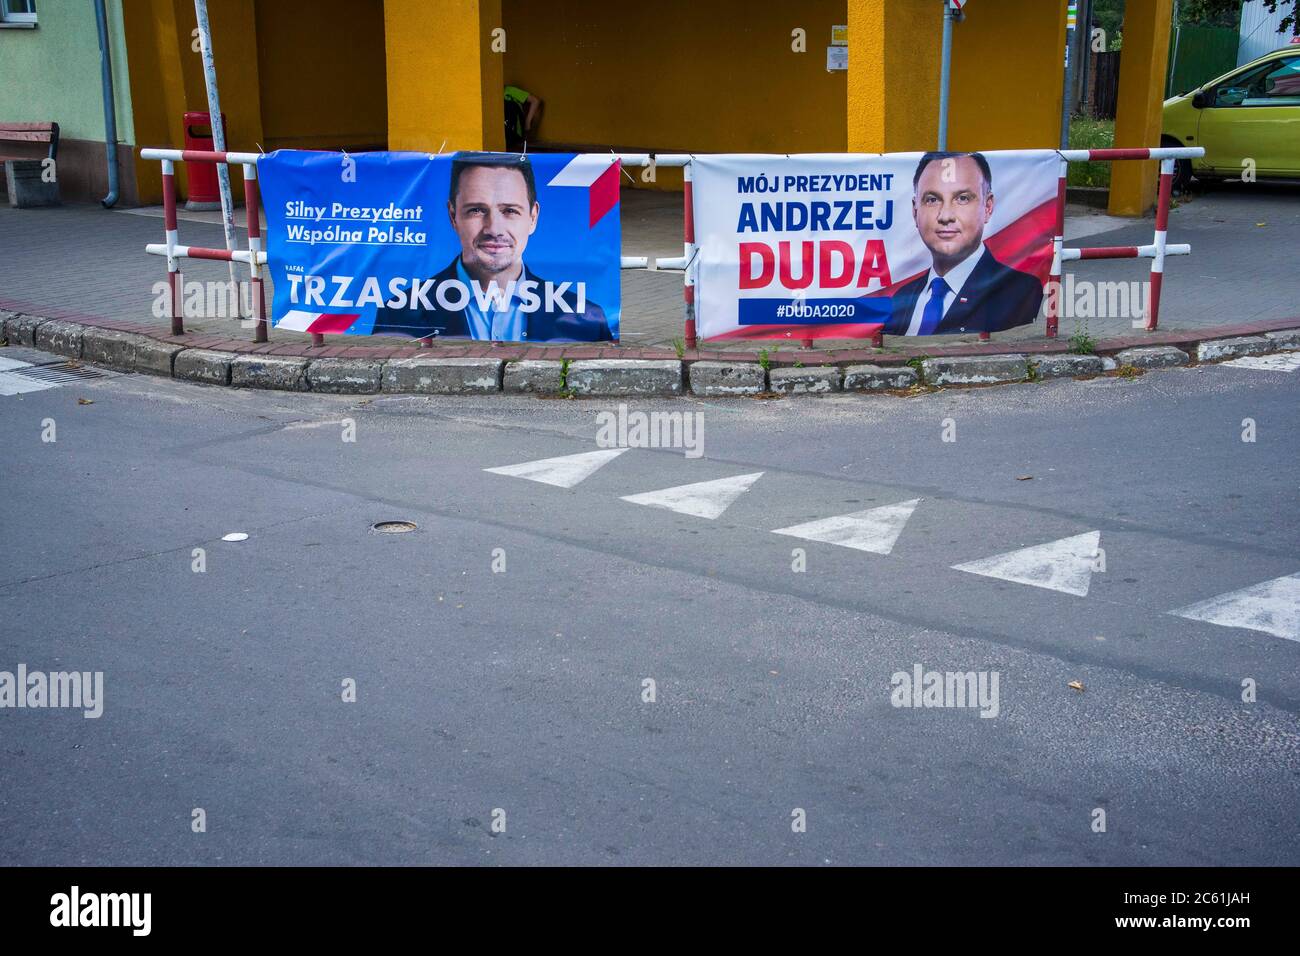 Wielkopolska, Poland. 6th July, 2020. The second round of presidential election in Poland will take place next Sunday. In the picture: two candidates for the office - Rafal Trzaskowski (L), the current president of Warsaw and Andrzej Duda (R), the current president of Poland. Credit: Dawid Tatarkiewicz/ZUMA Wire/Alamy Live News Stock Photo